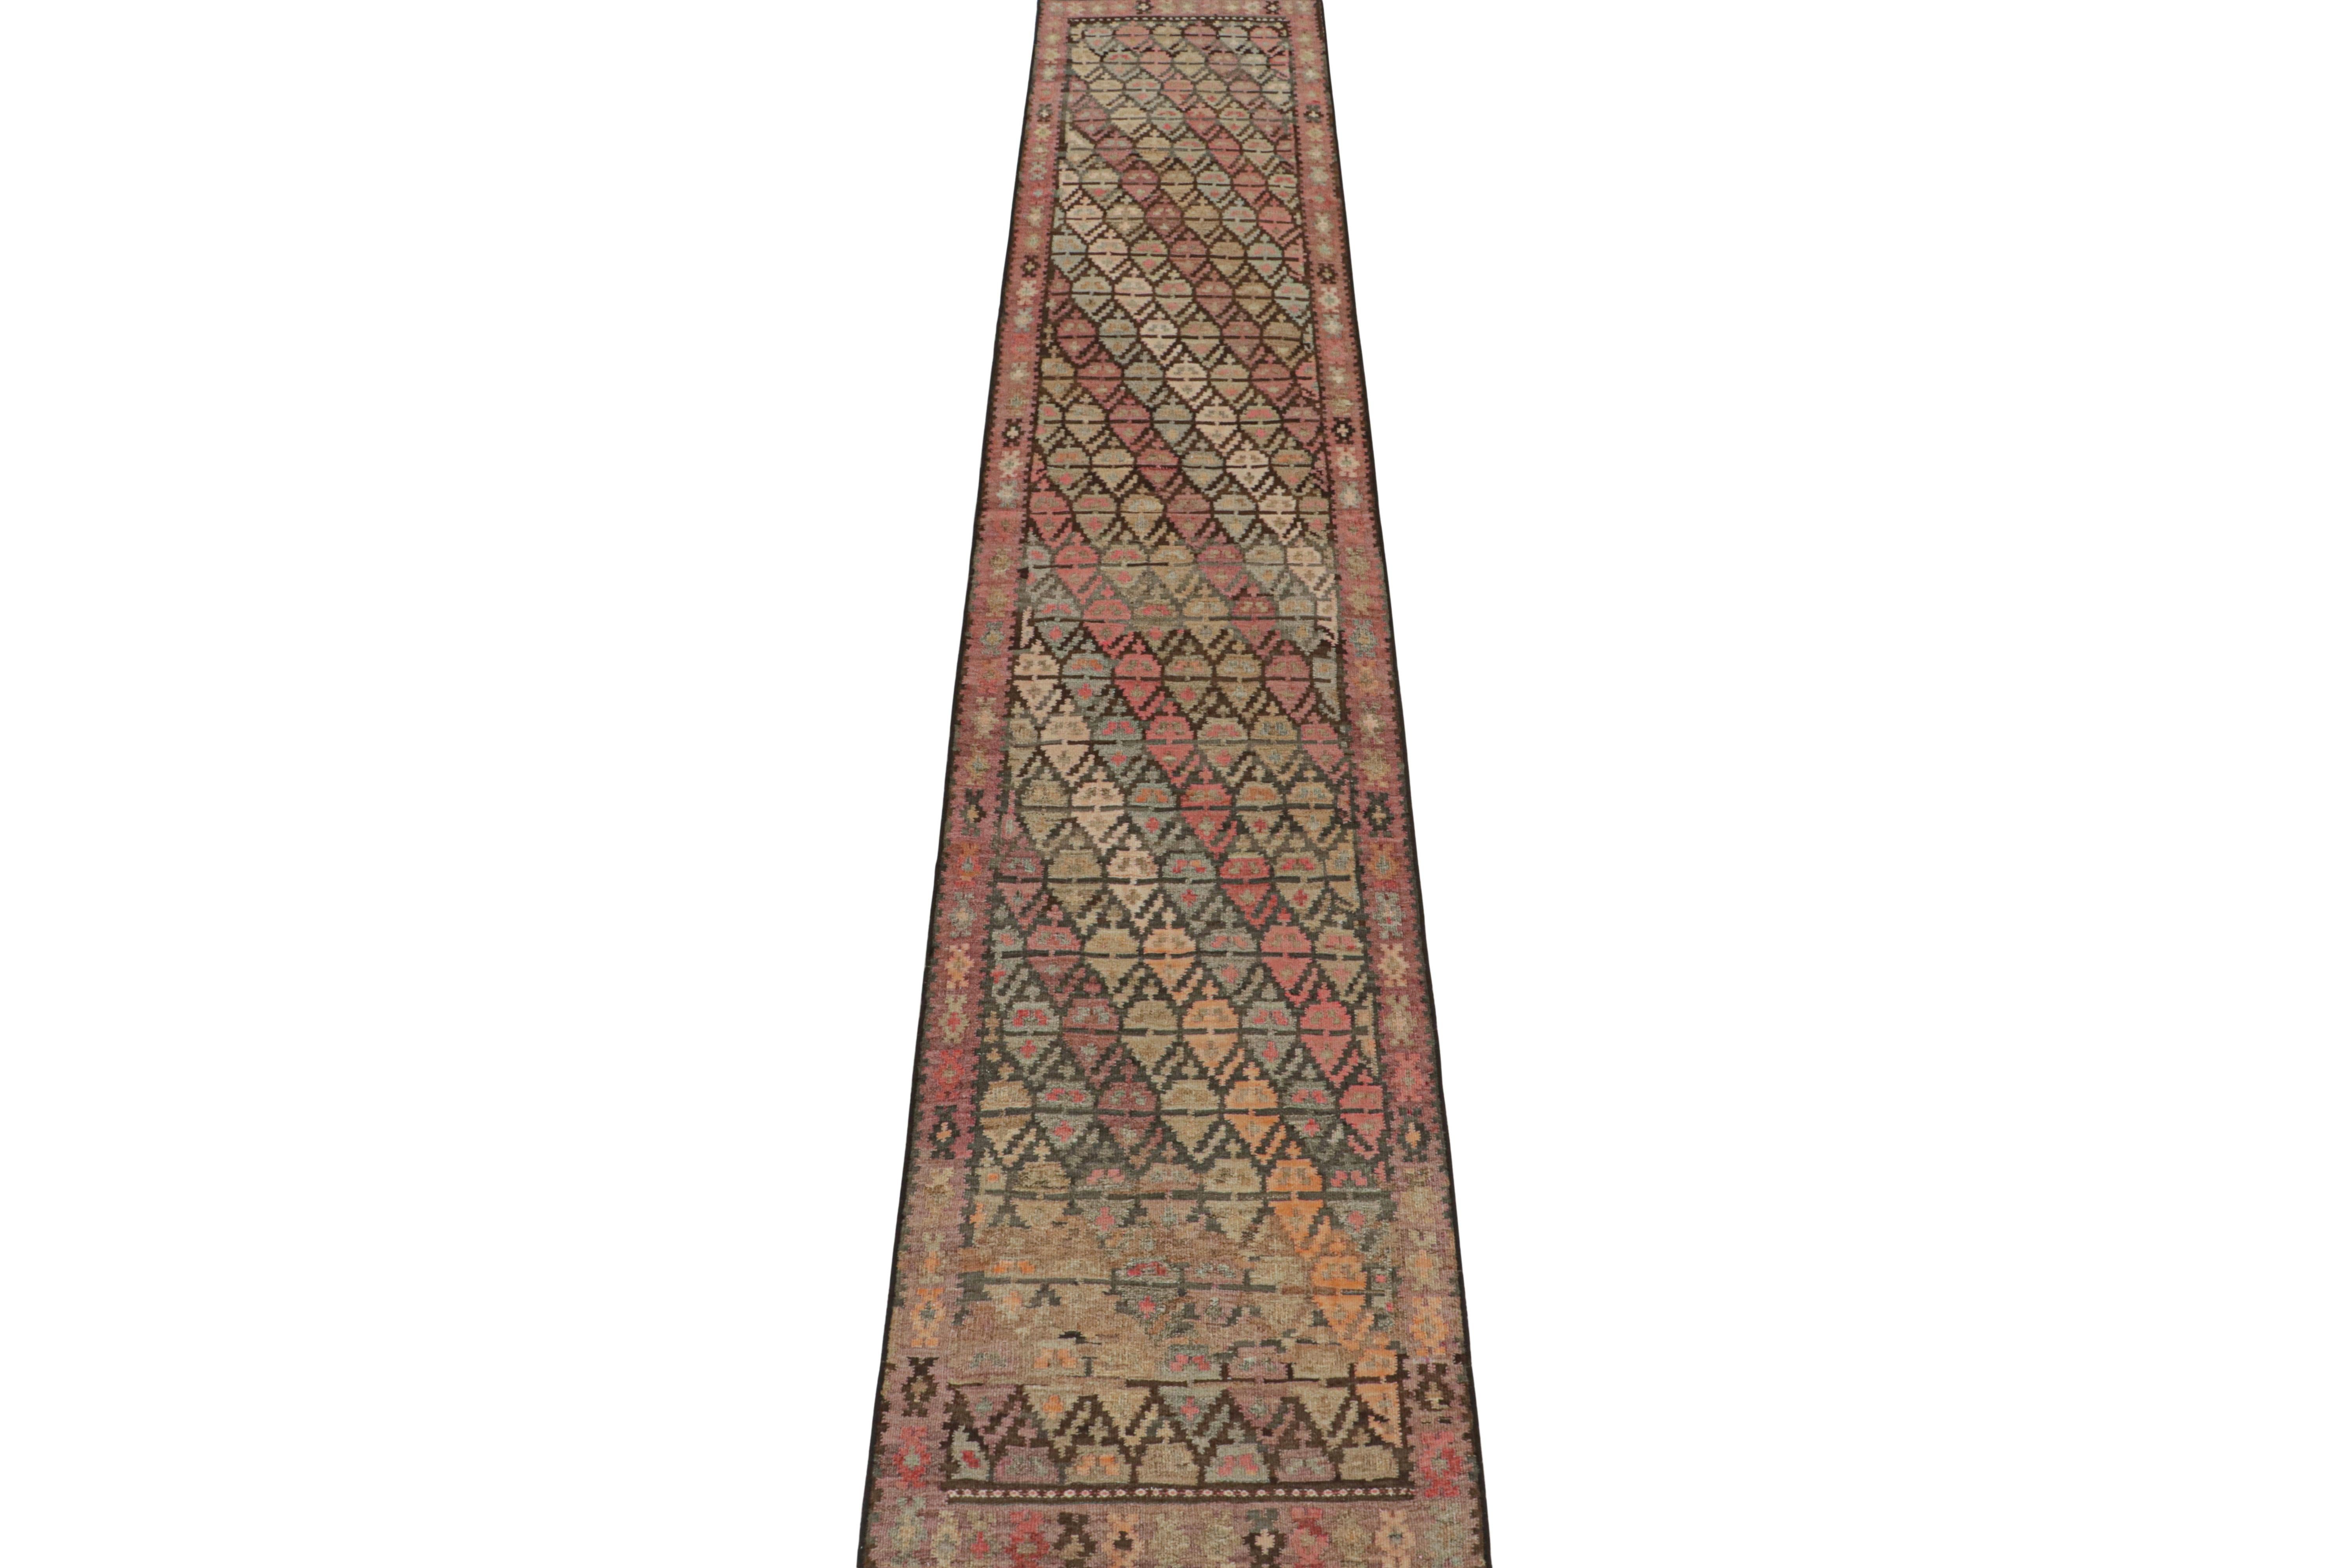 This vintage 3x15 Persian Kilim runner is handwoven in wool and originates circa 1950-1960. This Kilim is believed to hail from Meshkin—a small village known for its craft among what connoisseurs call 